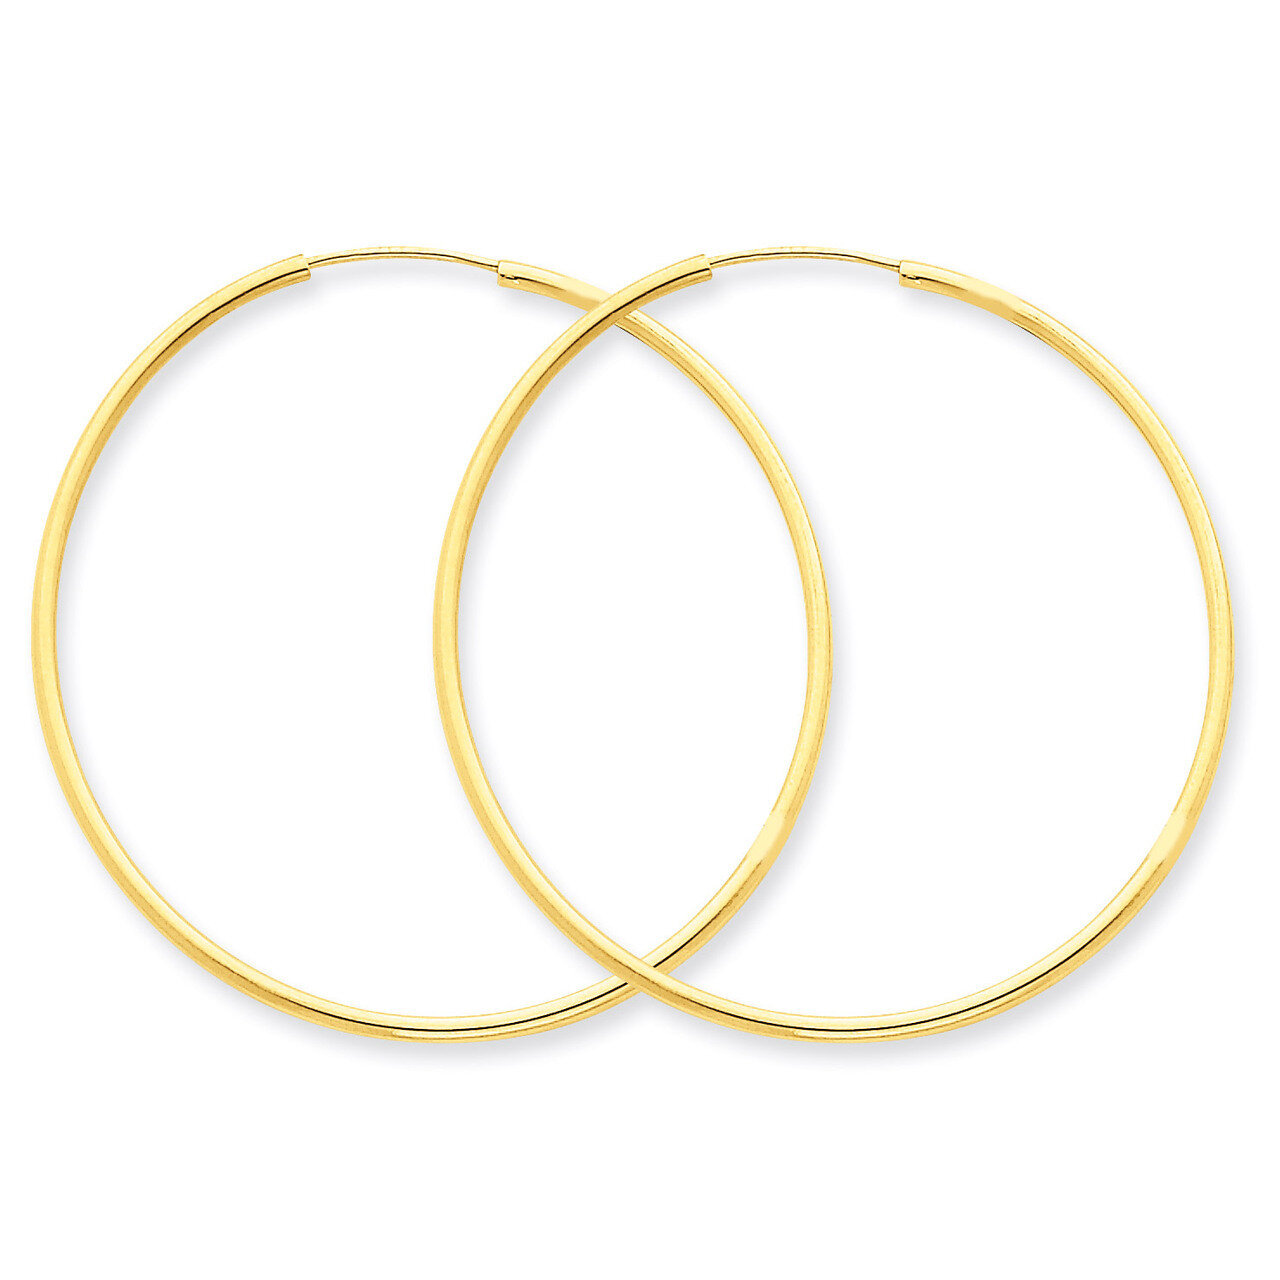 1.5mm Polished Round Endless Hoop Earrings 14k Gold XY1164